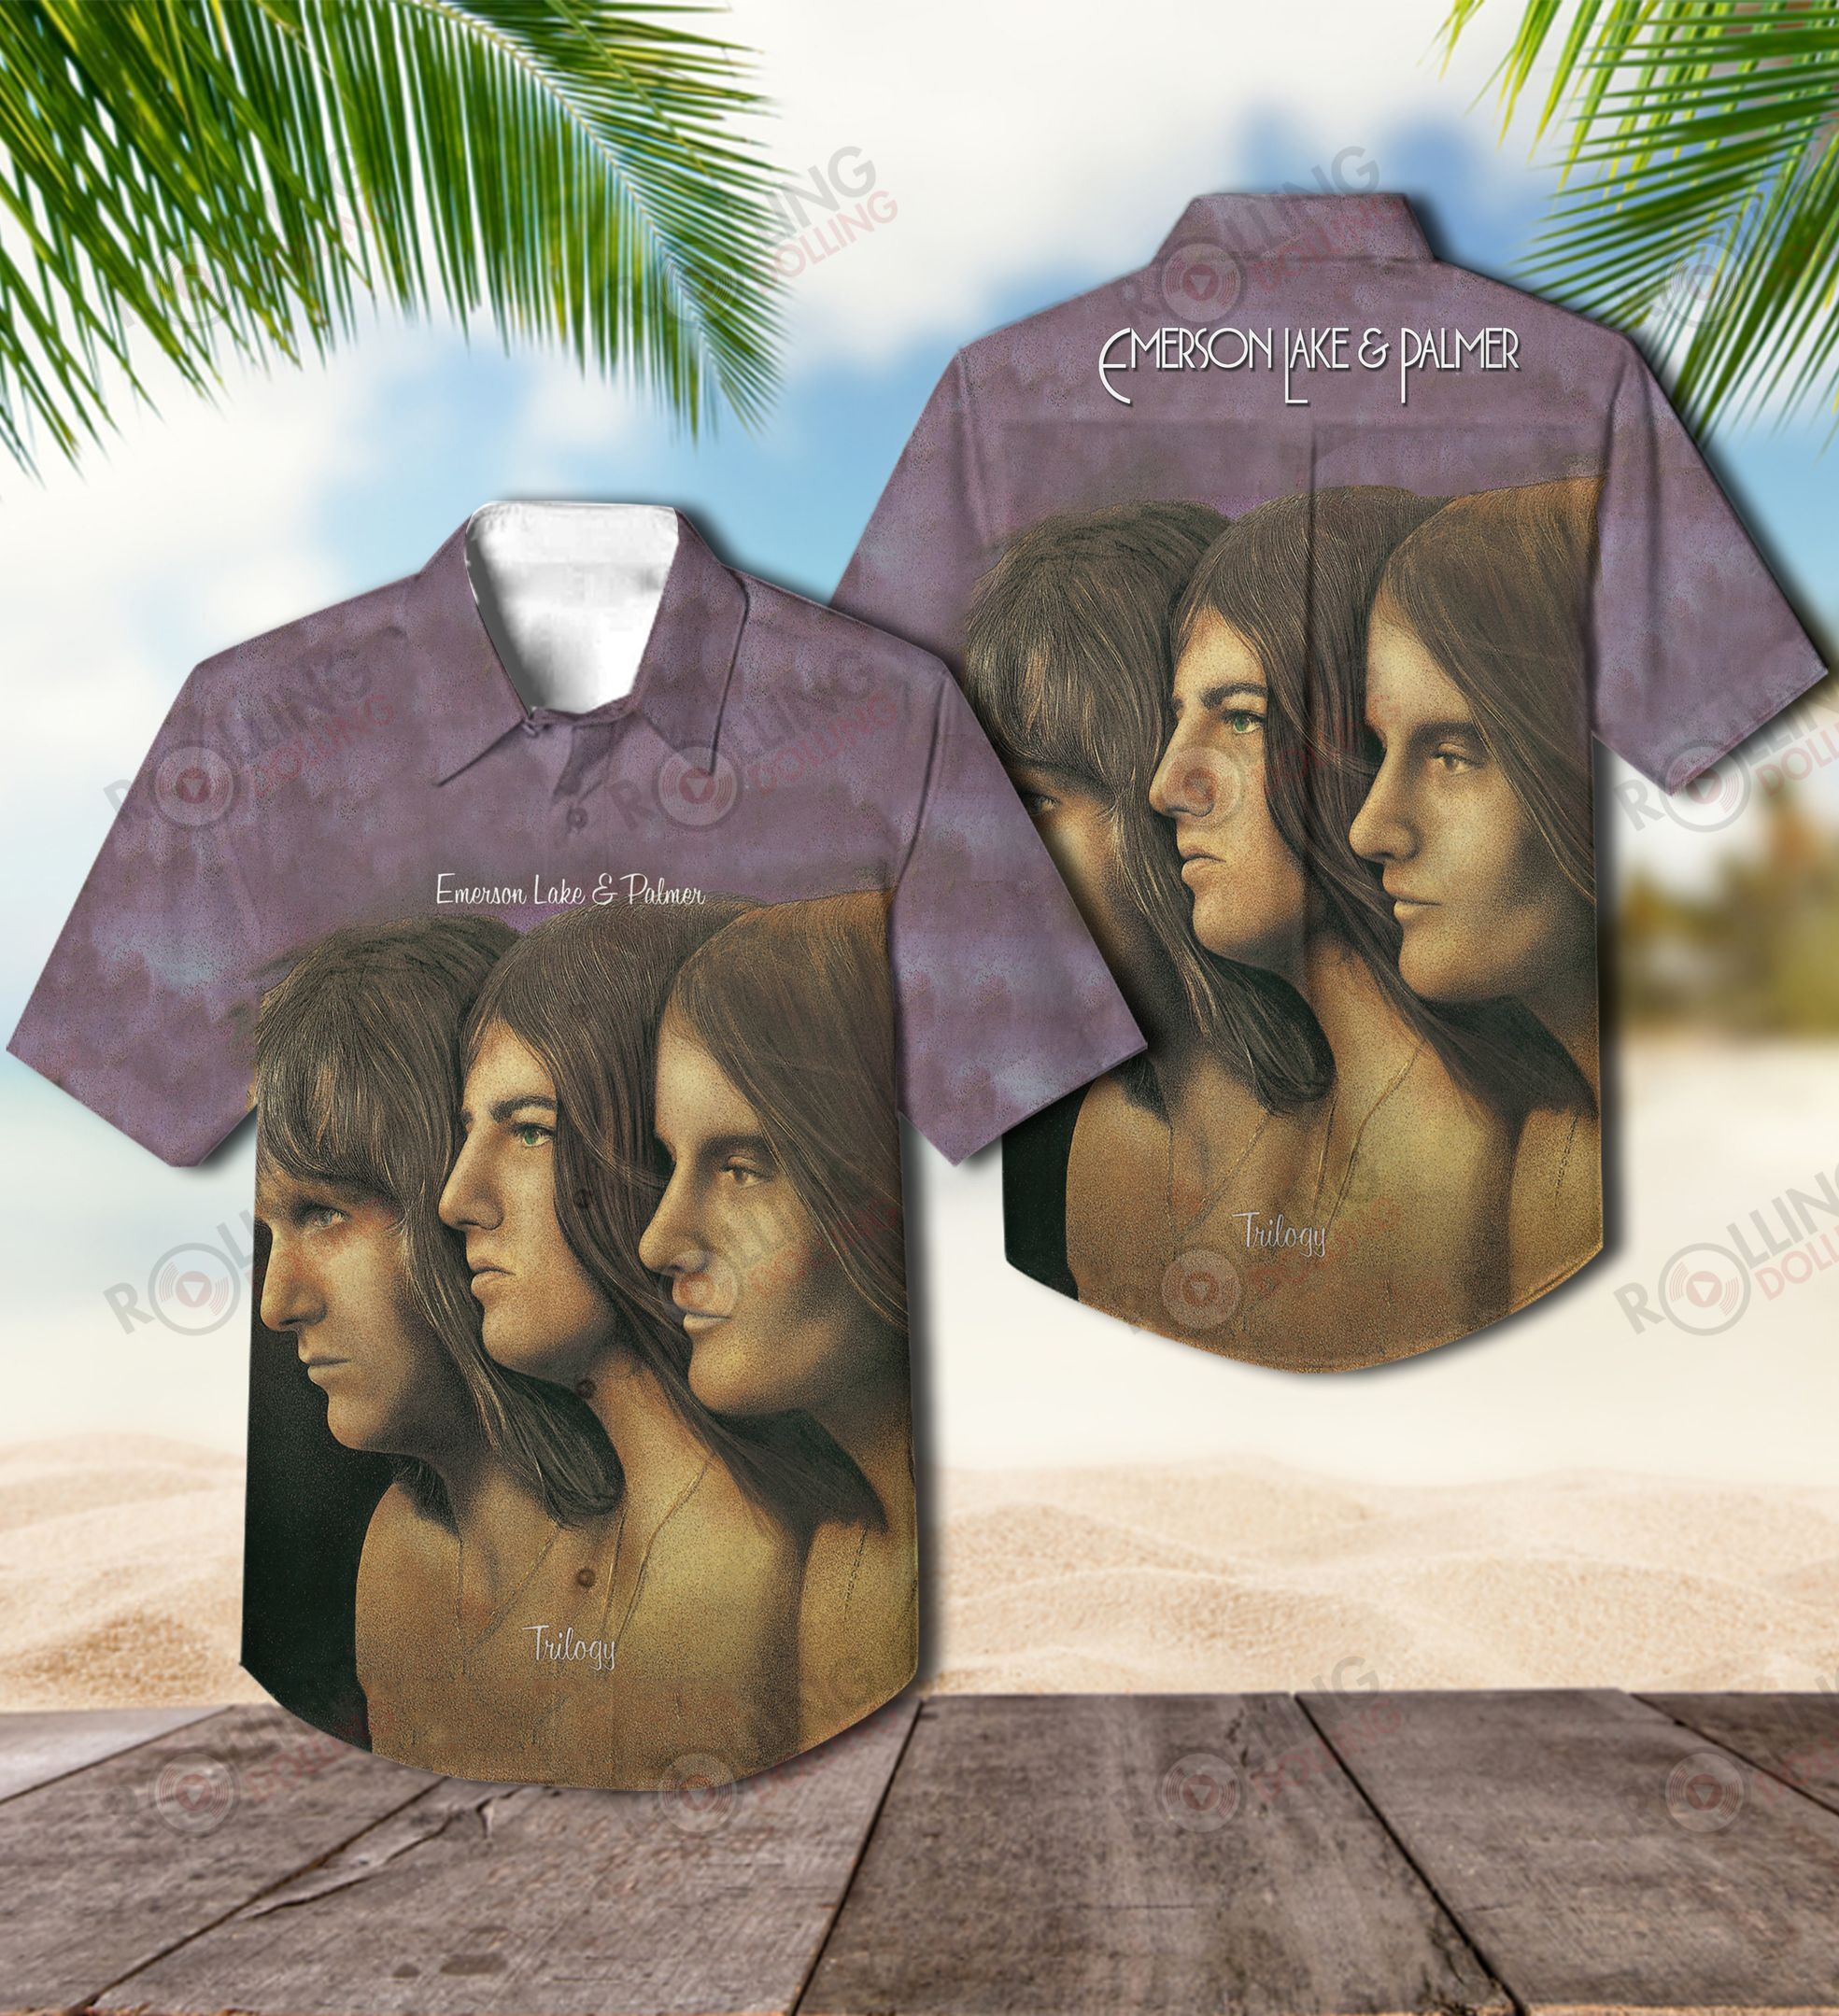 This would make a great gift for any fan who loves Hawaiian Shirt as well as Rock band 97